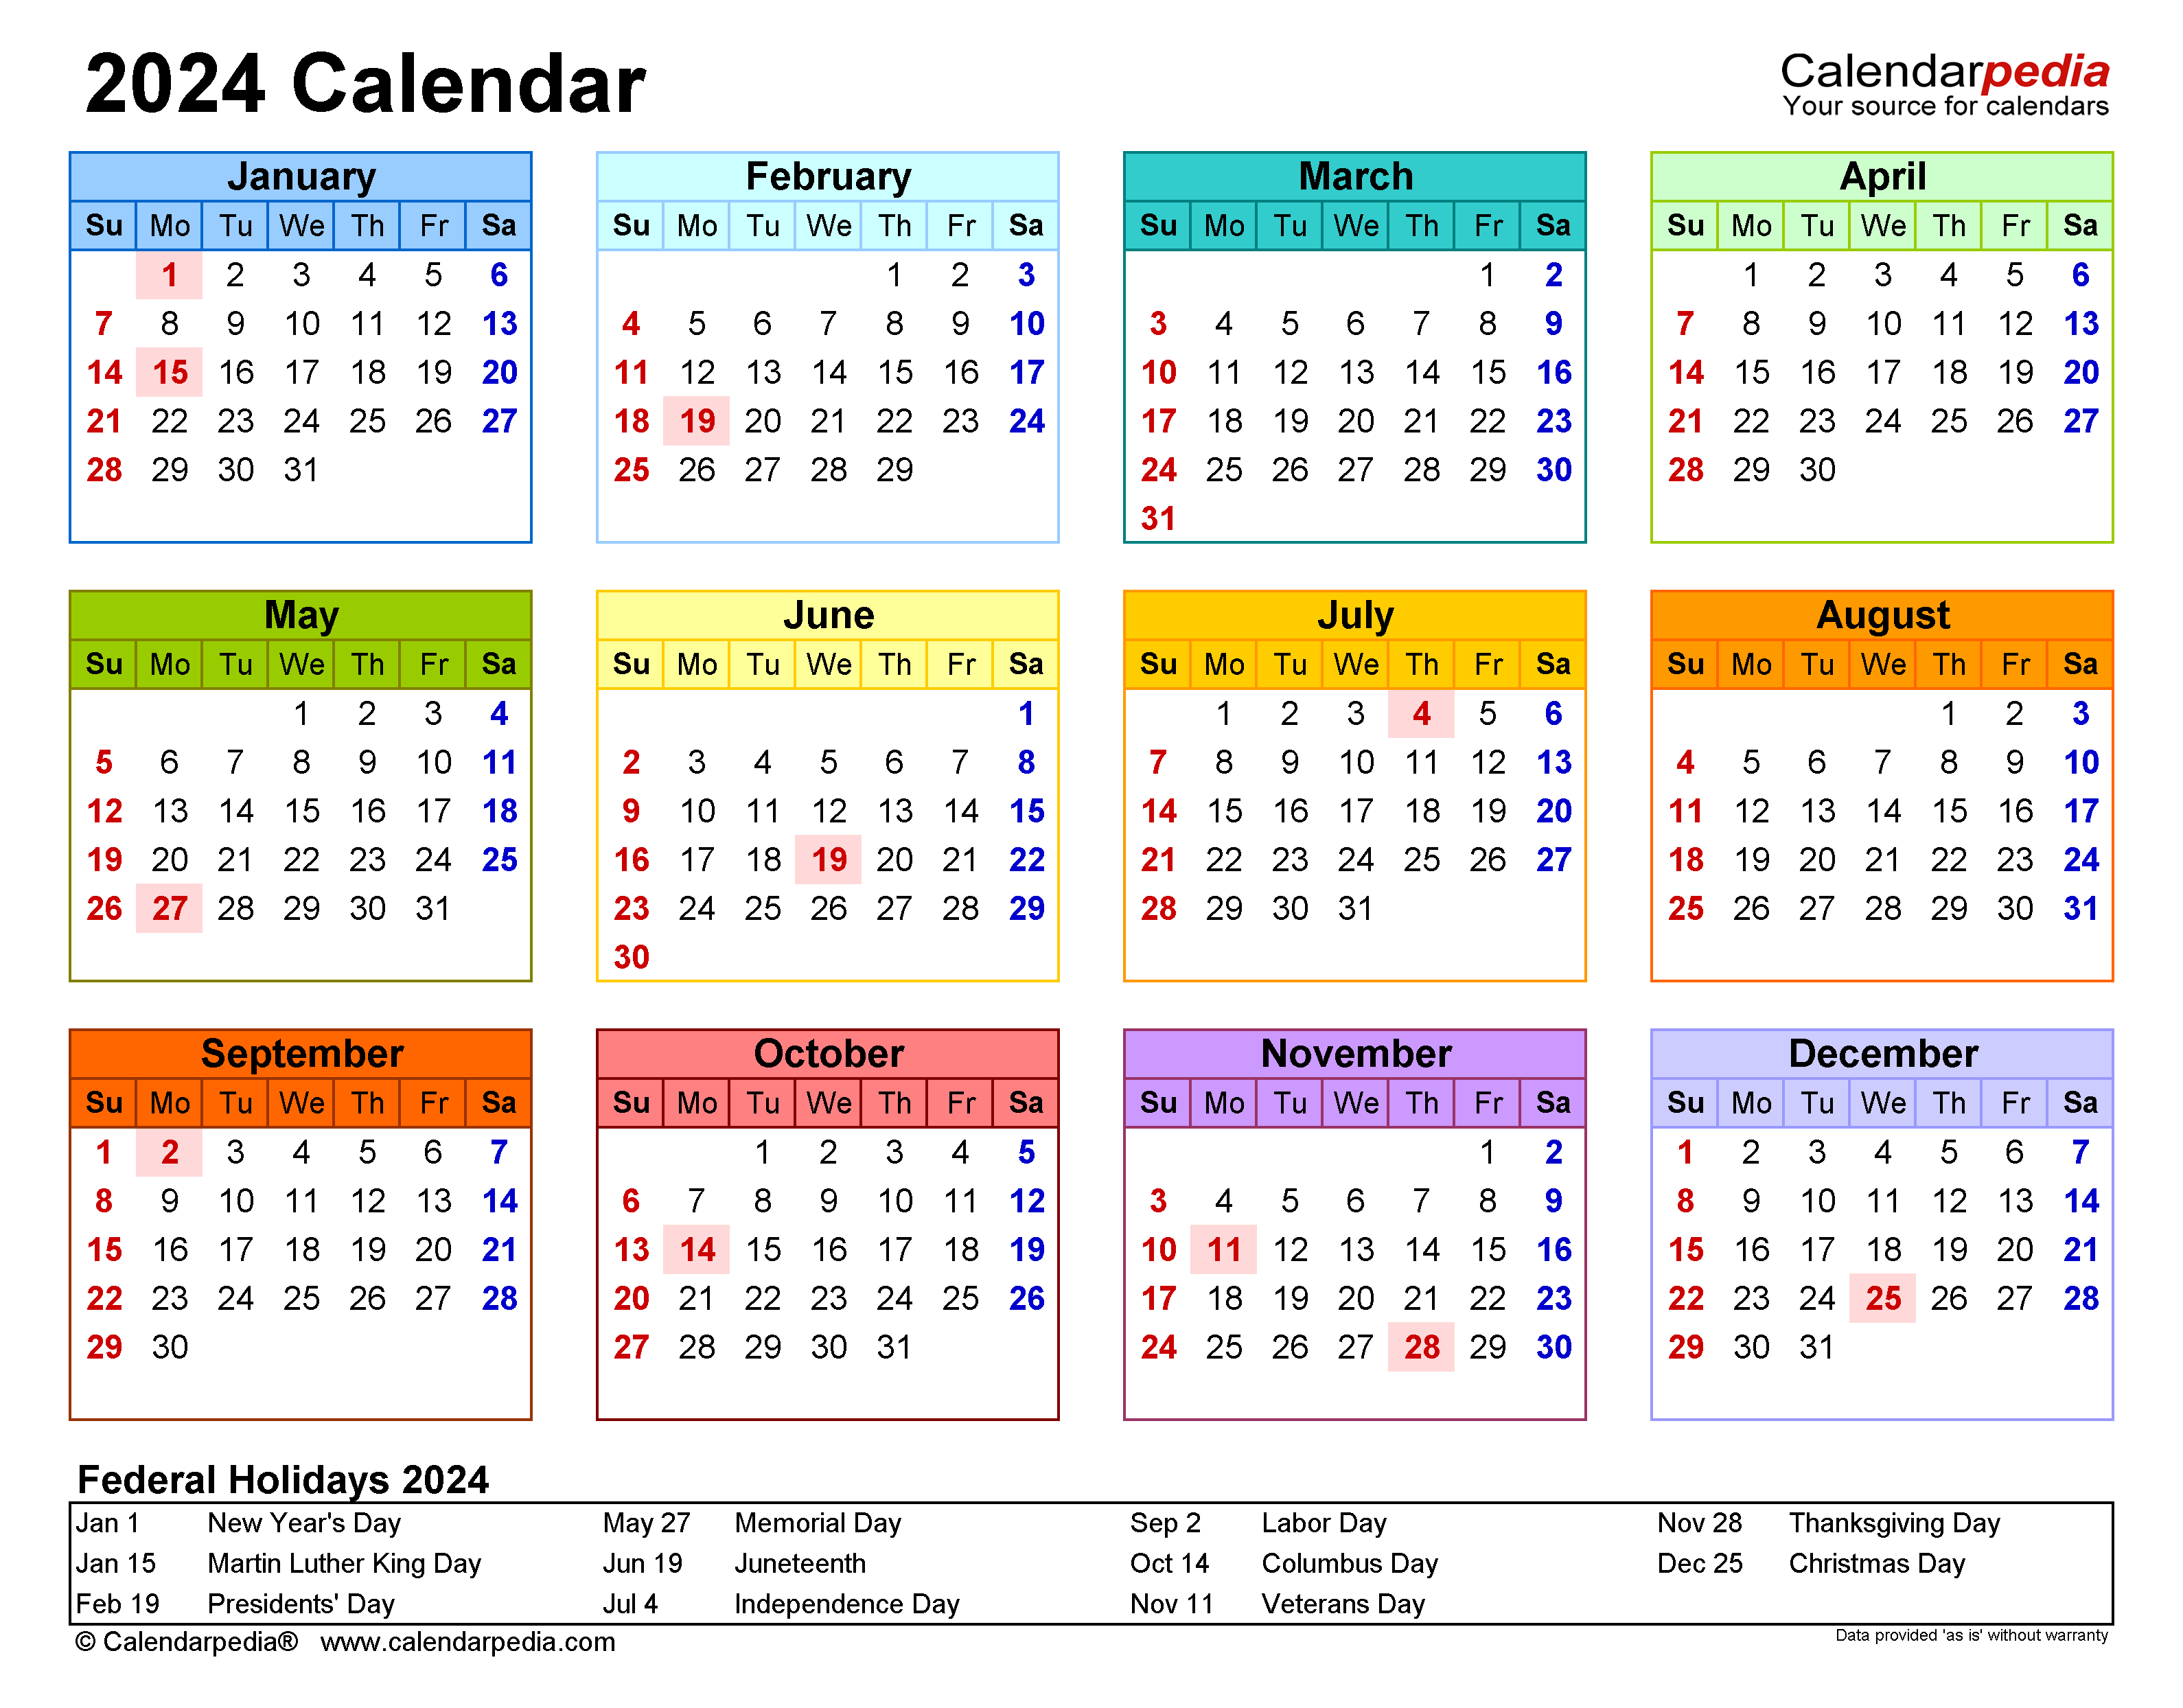 Printable Calendar 2024 - Free Printable 2024 Calendar 2months In Page With Holidays